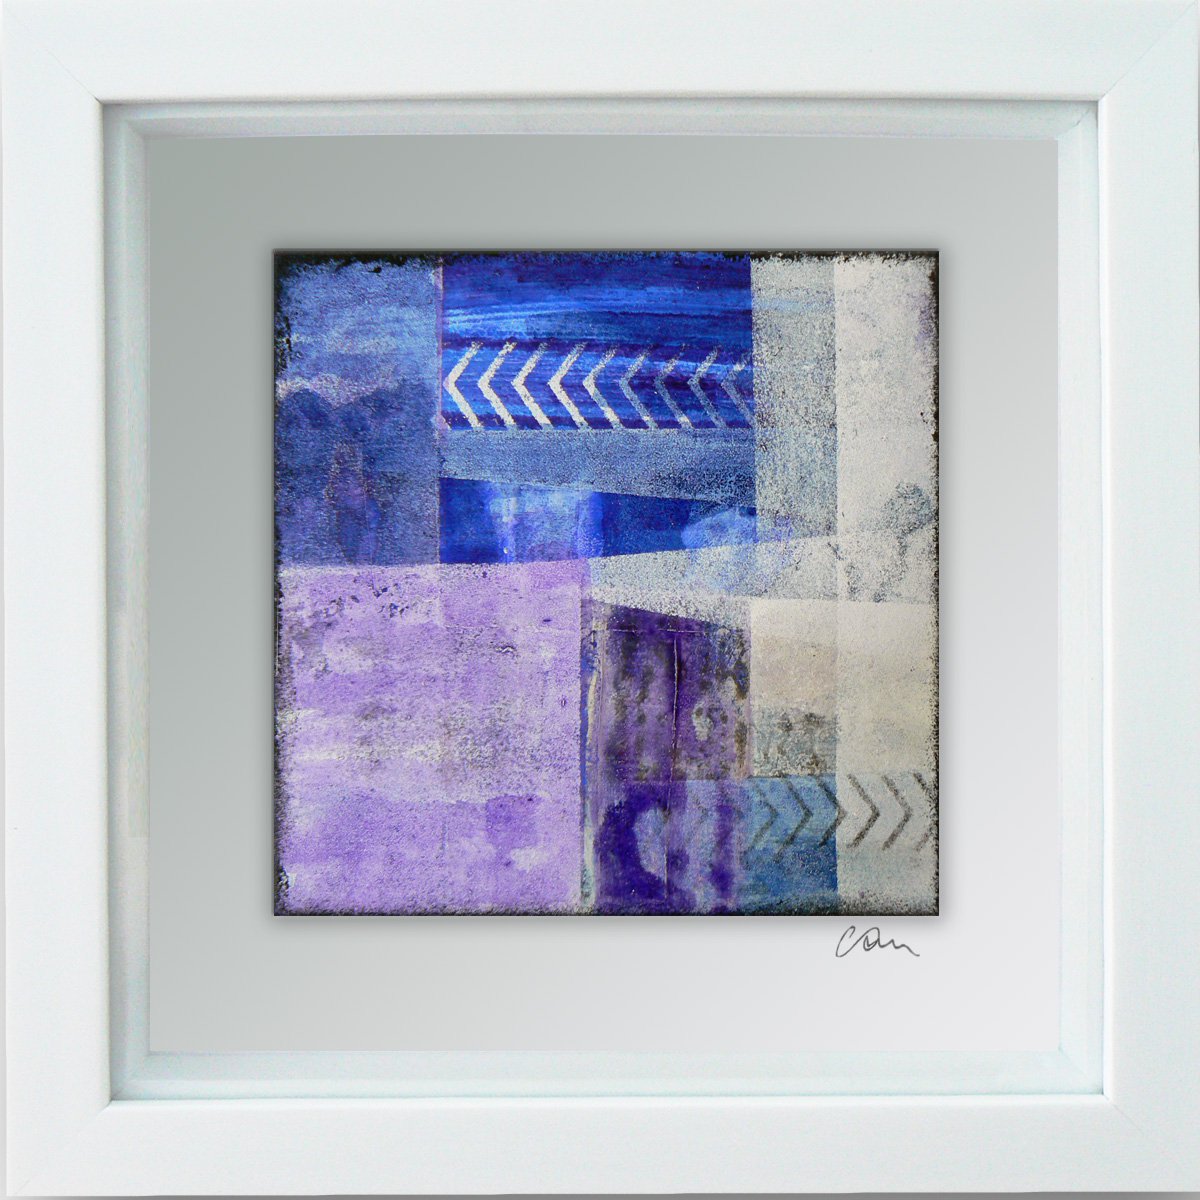 Framed ready to hang original abstract - Cahier #11 by Carolynne Coulson